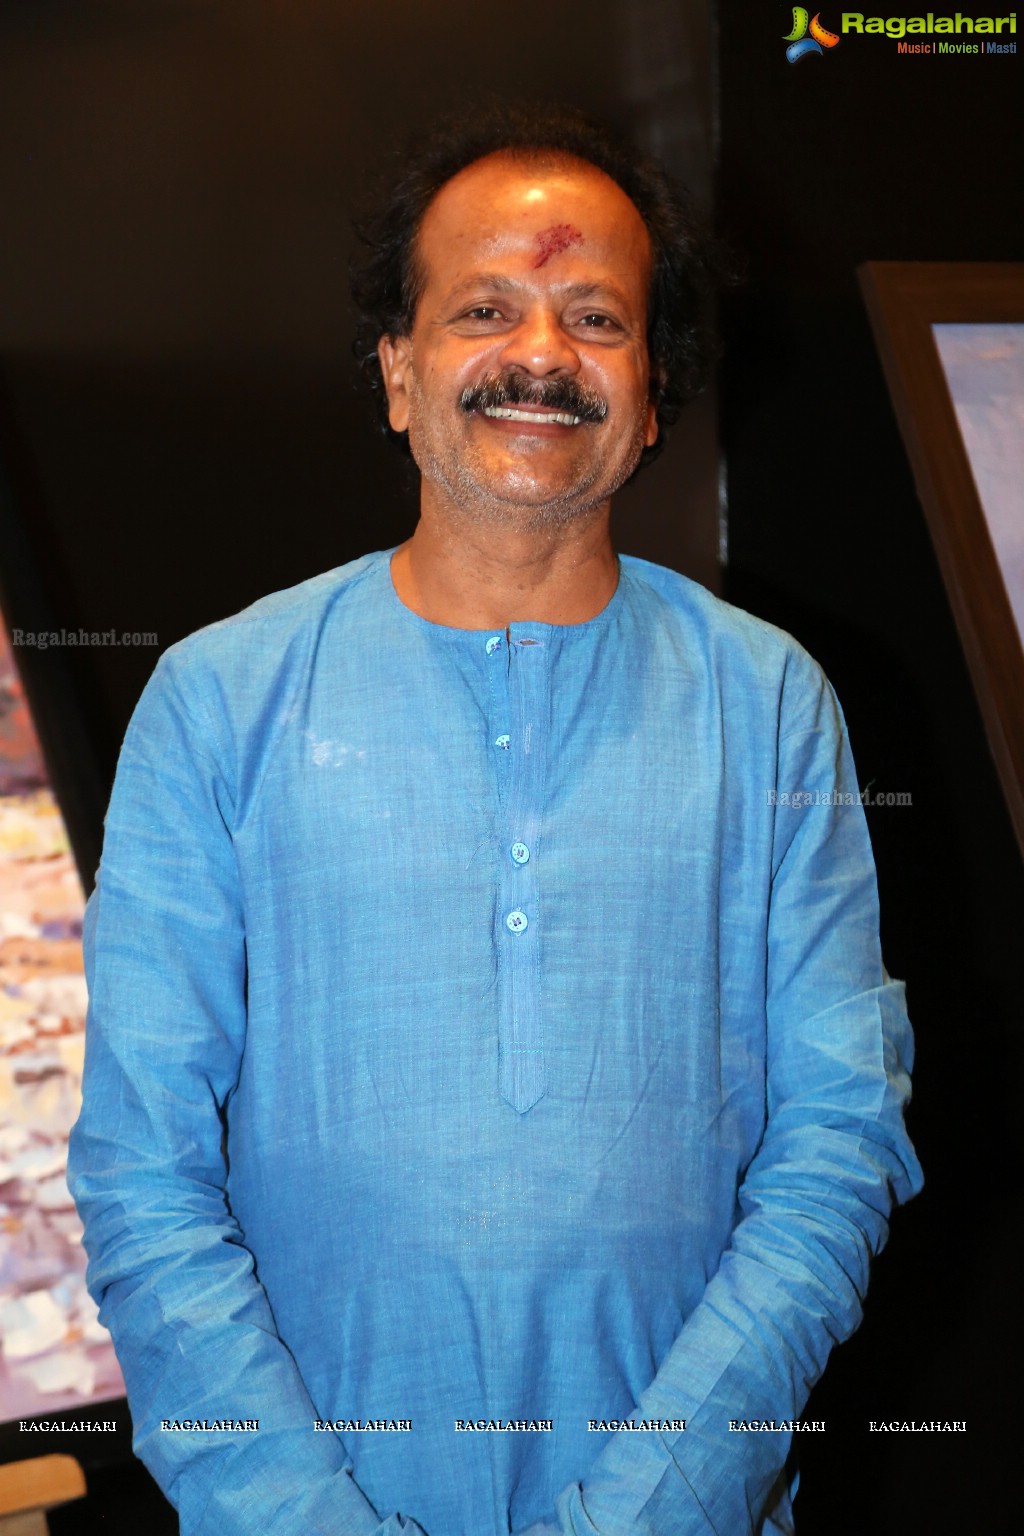 66th Solo Exhibition of Paintings by Hari at Park Hyatt, Hyderabad